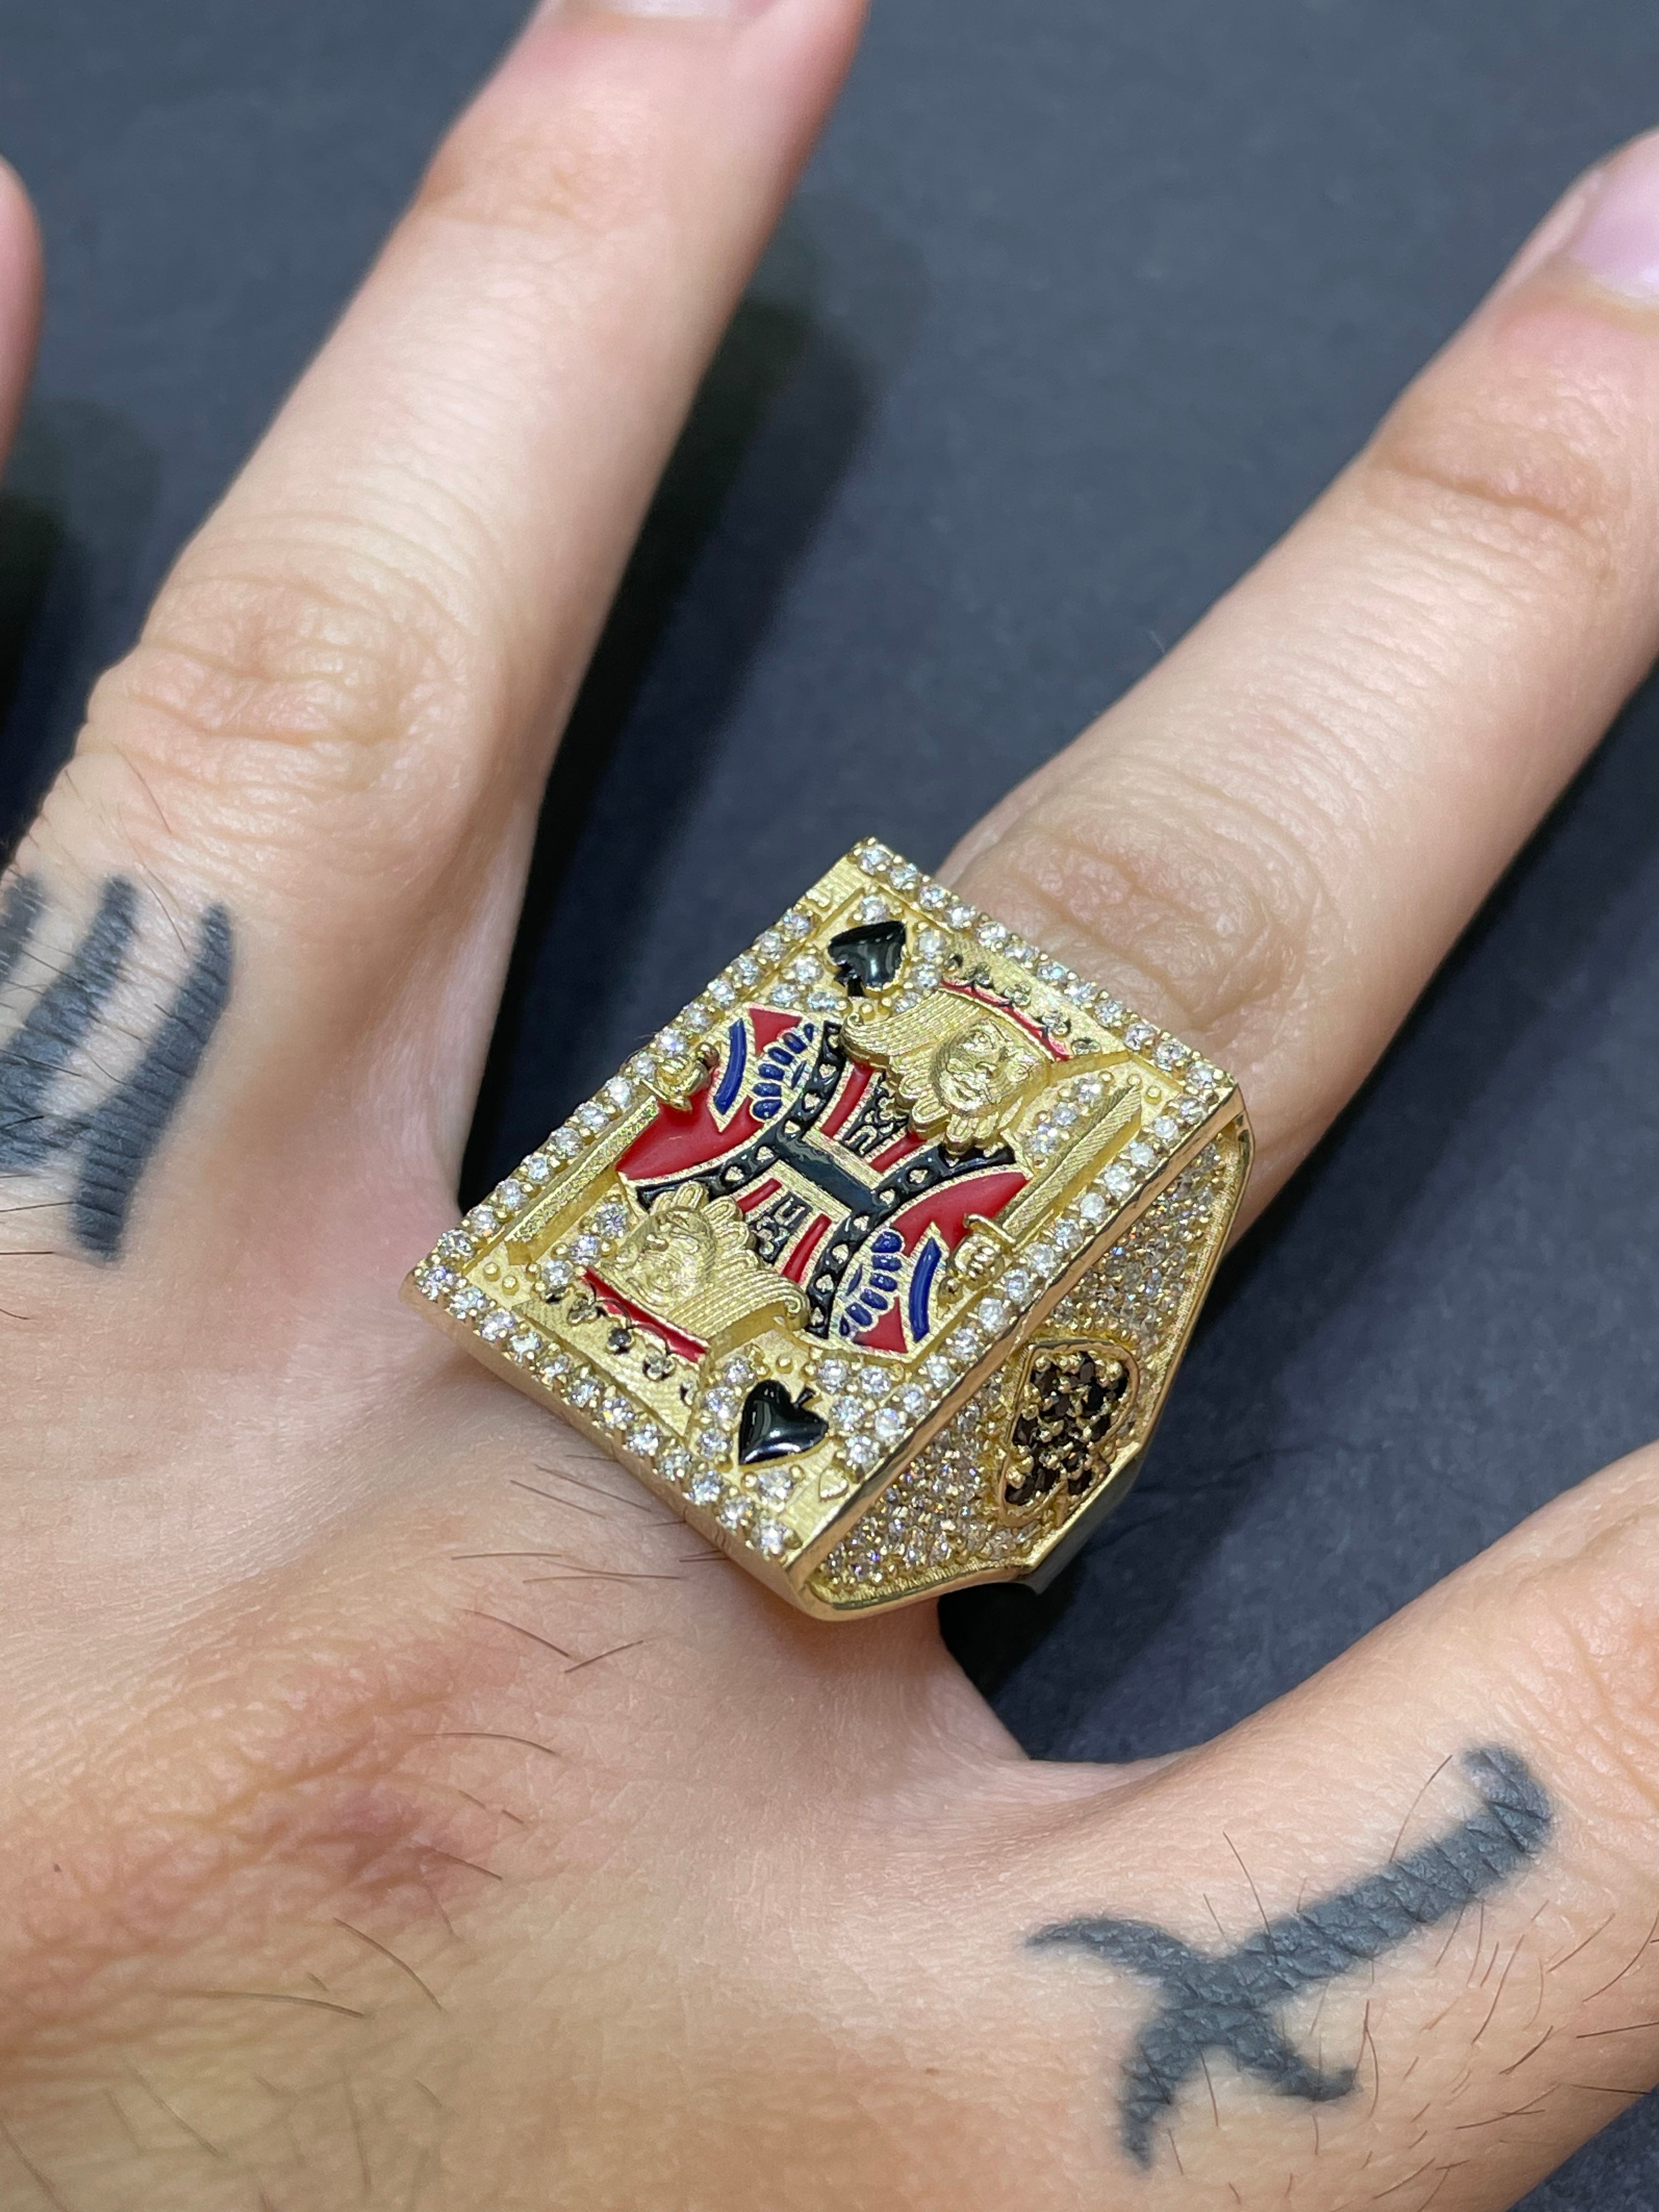  14k ICED OUT Ring